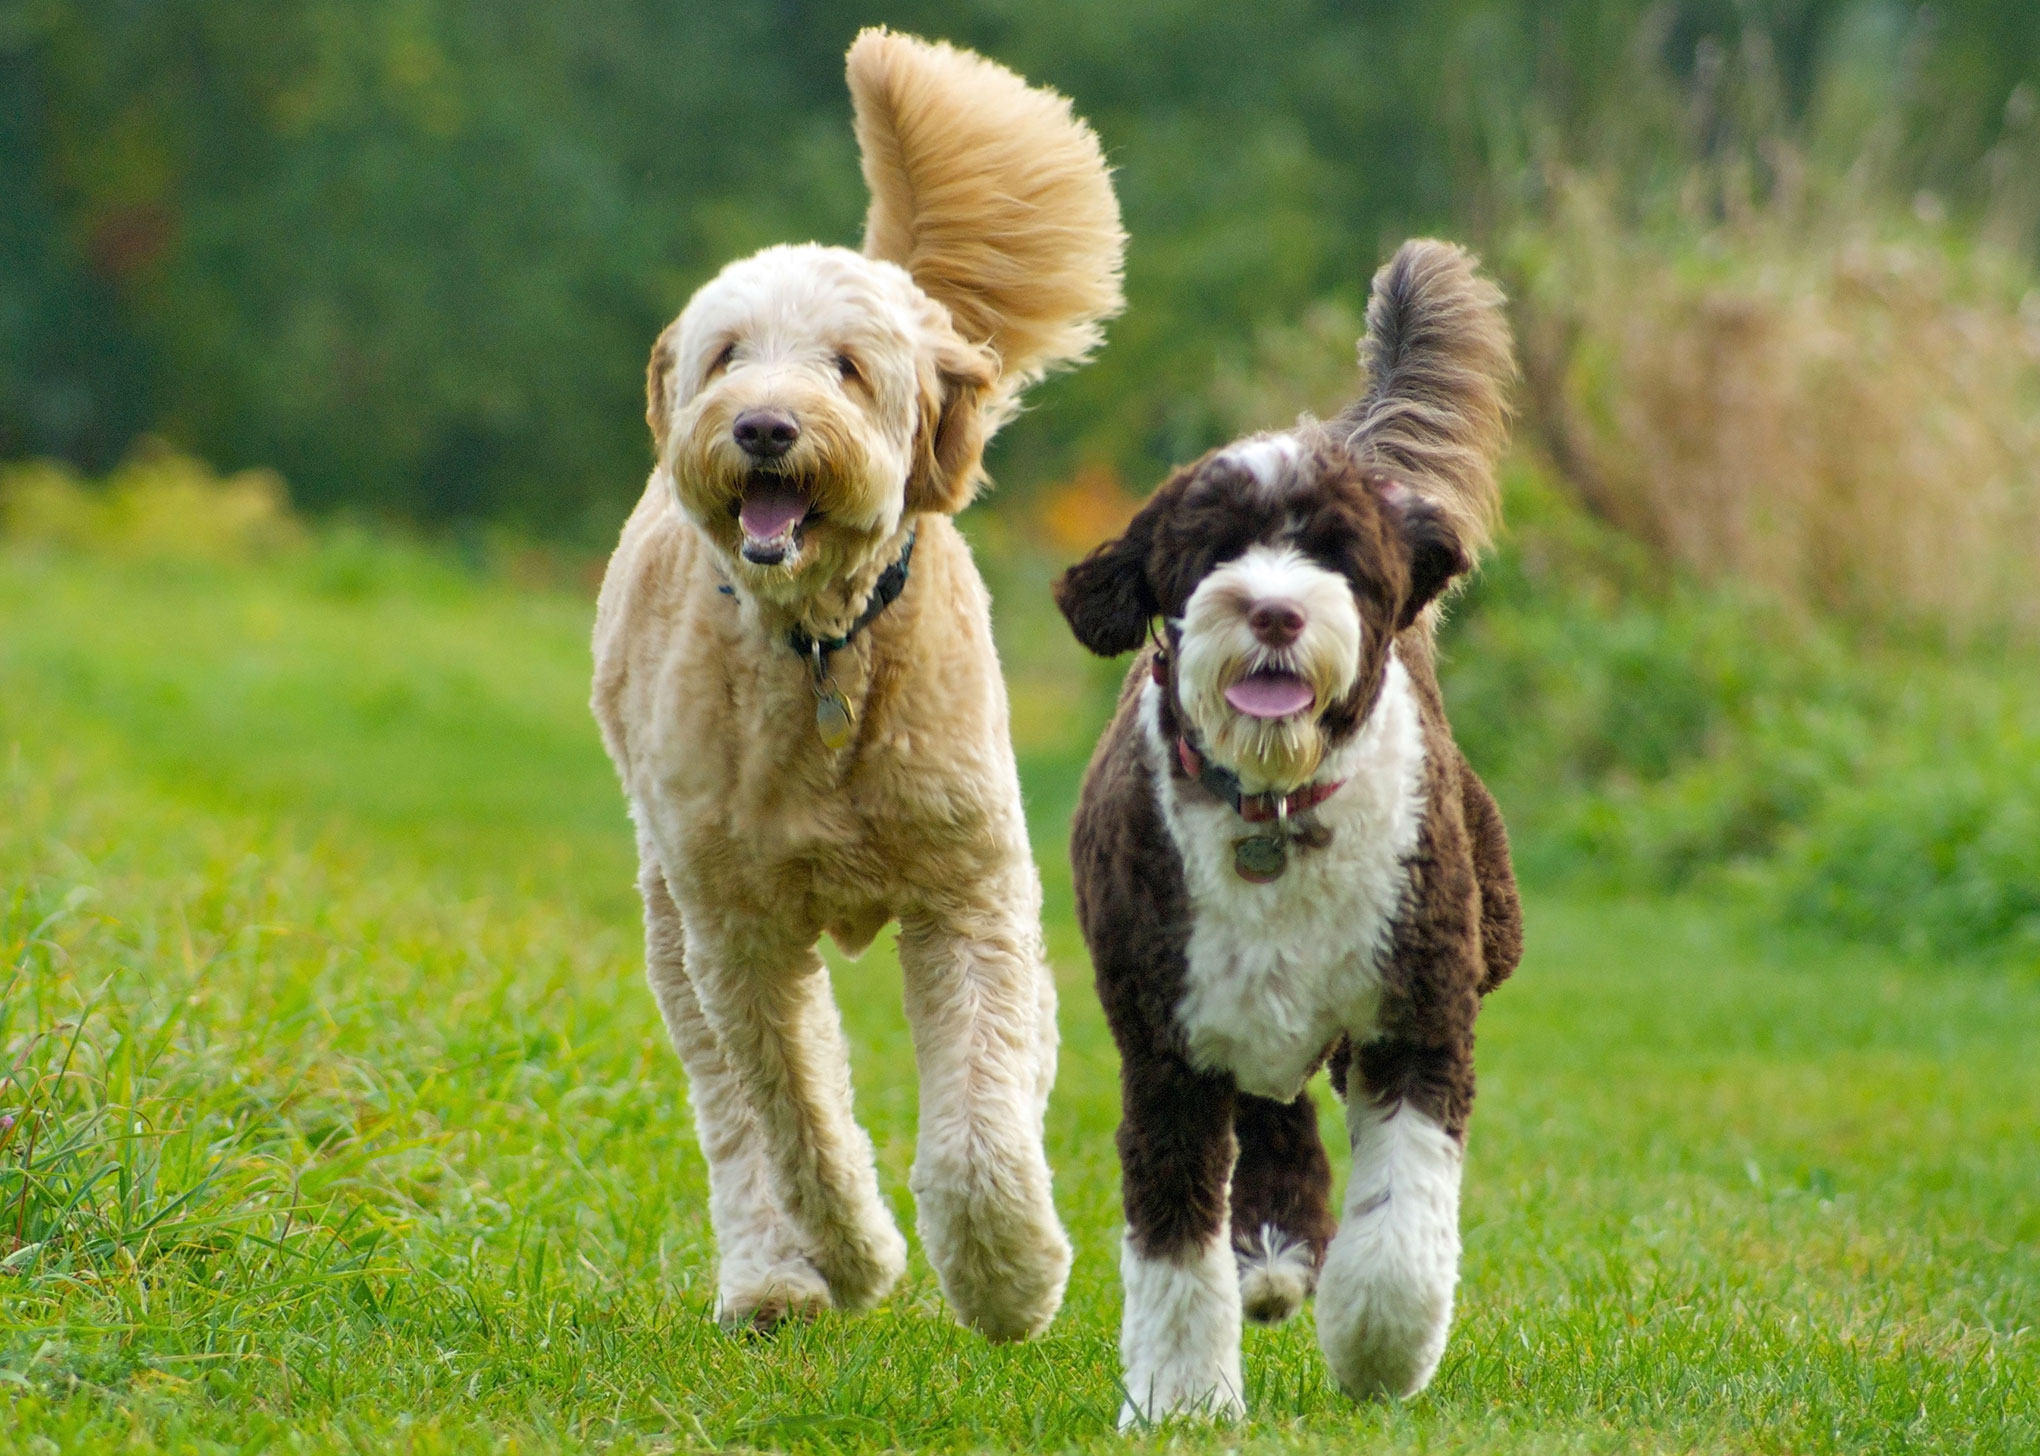 Tow golden doodles running together. One is gold coloured, the other is chocolate brown with large patches of white.